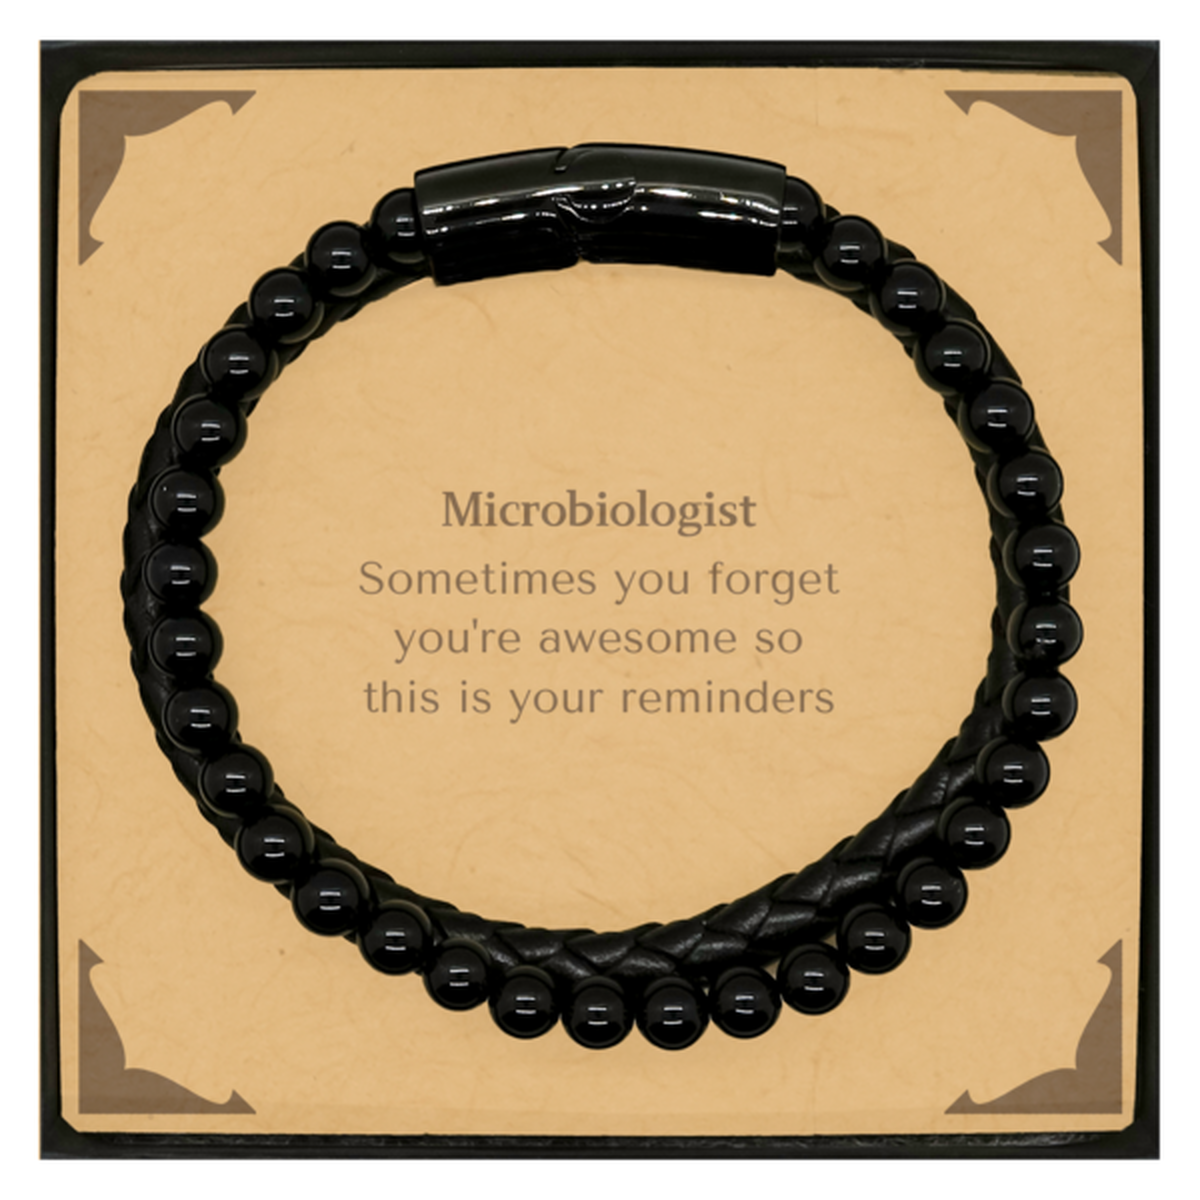 Sentimental Microbiologist Stone Leather Bracelets, Microbiologist Sometimes you forget you're awesome so this is your reminders, Graduation Christmas Birthday Gifts for Microbiologist, Men, Women, Coworkers